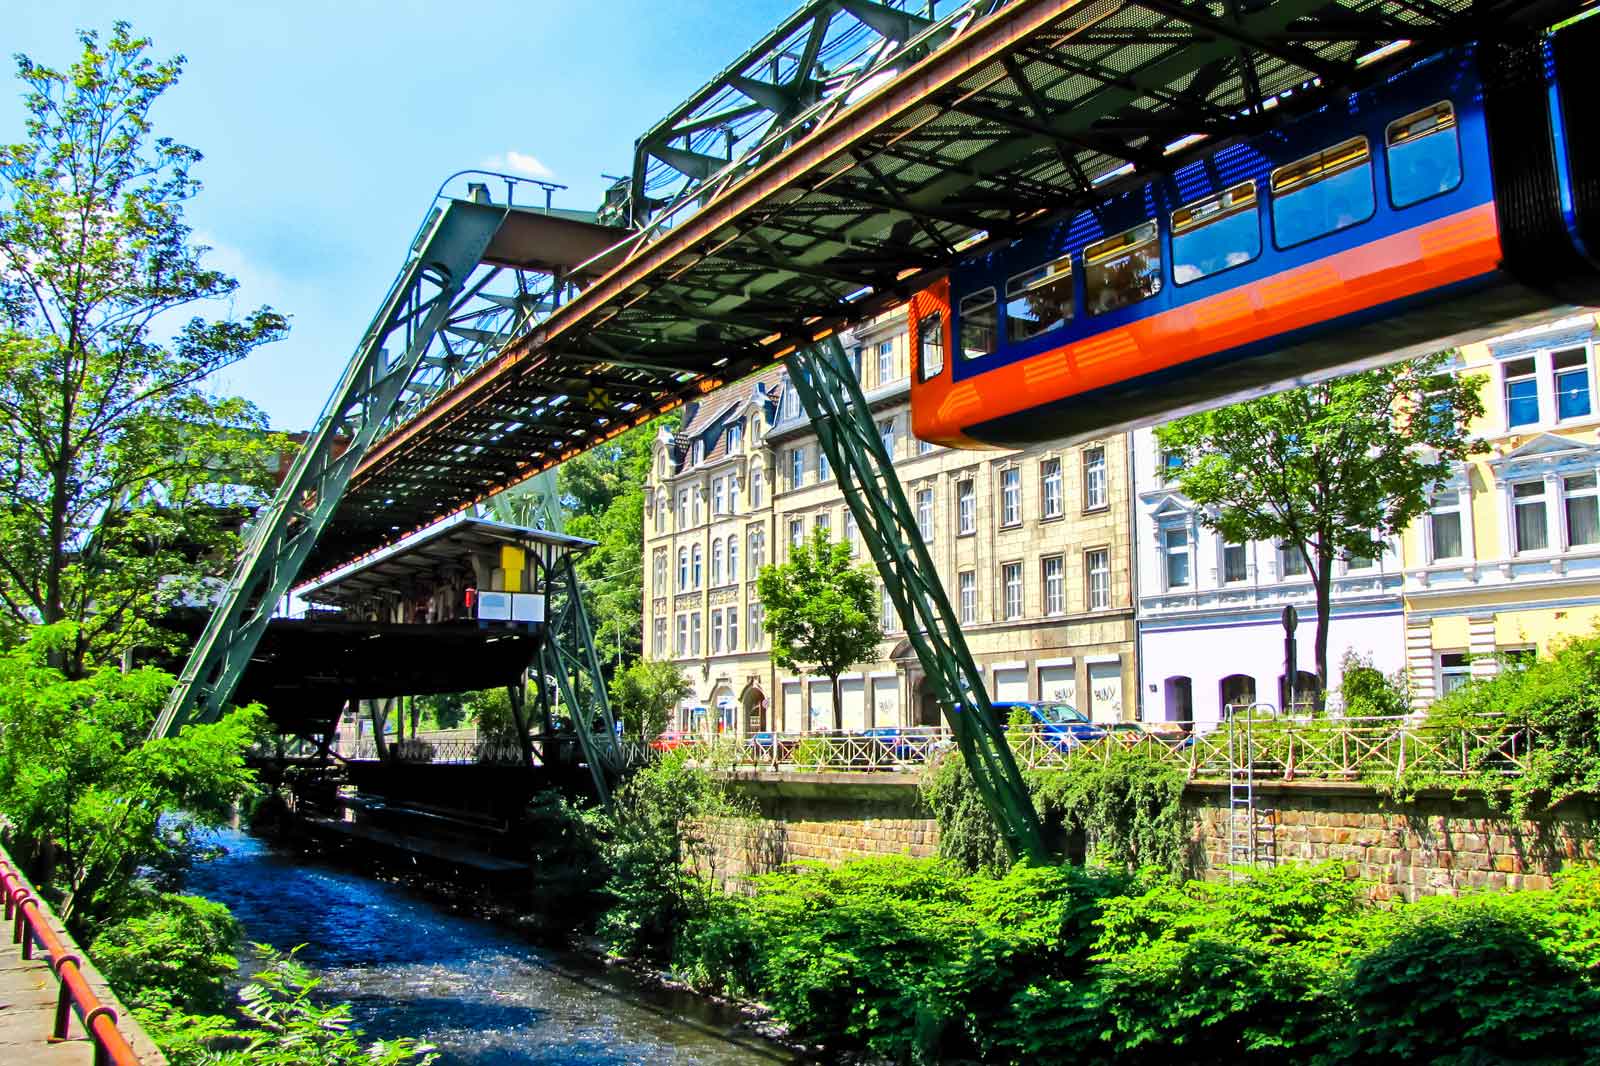 Monorail in Wuppertal